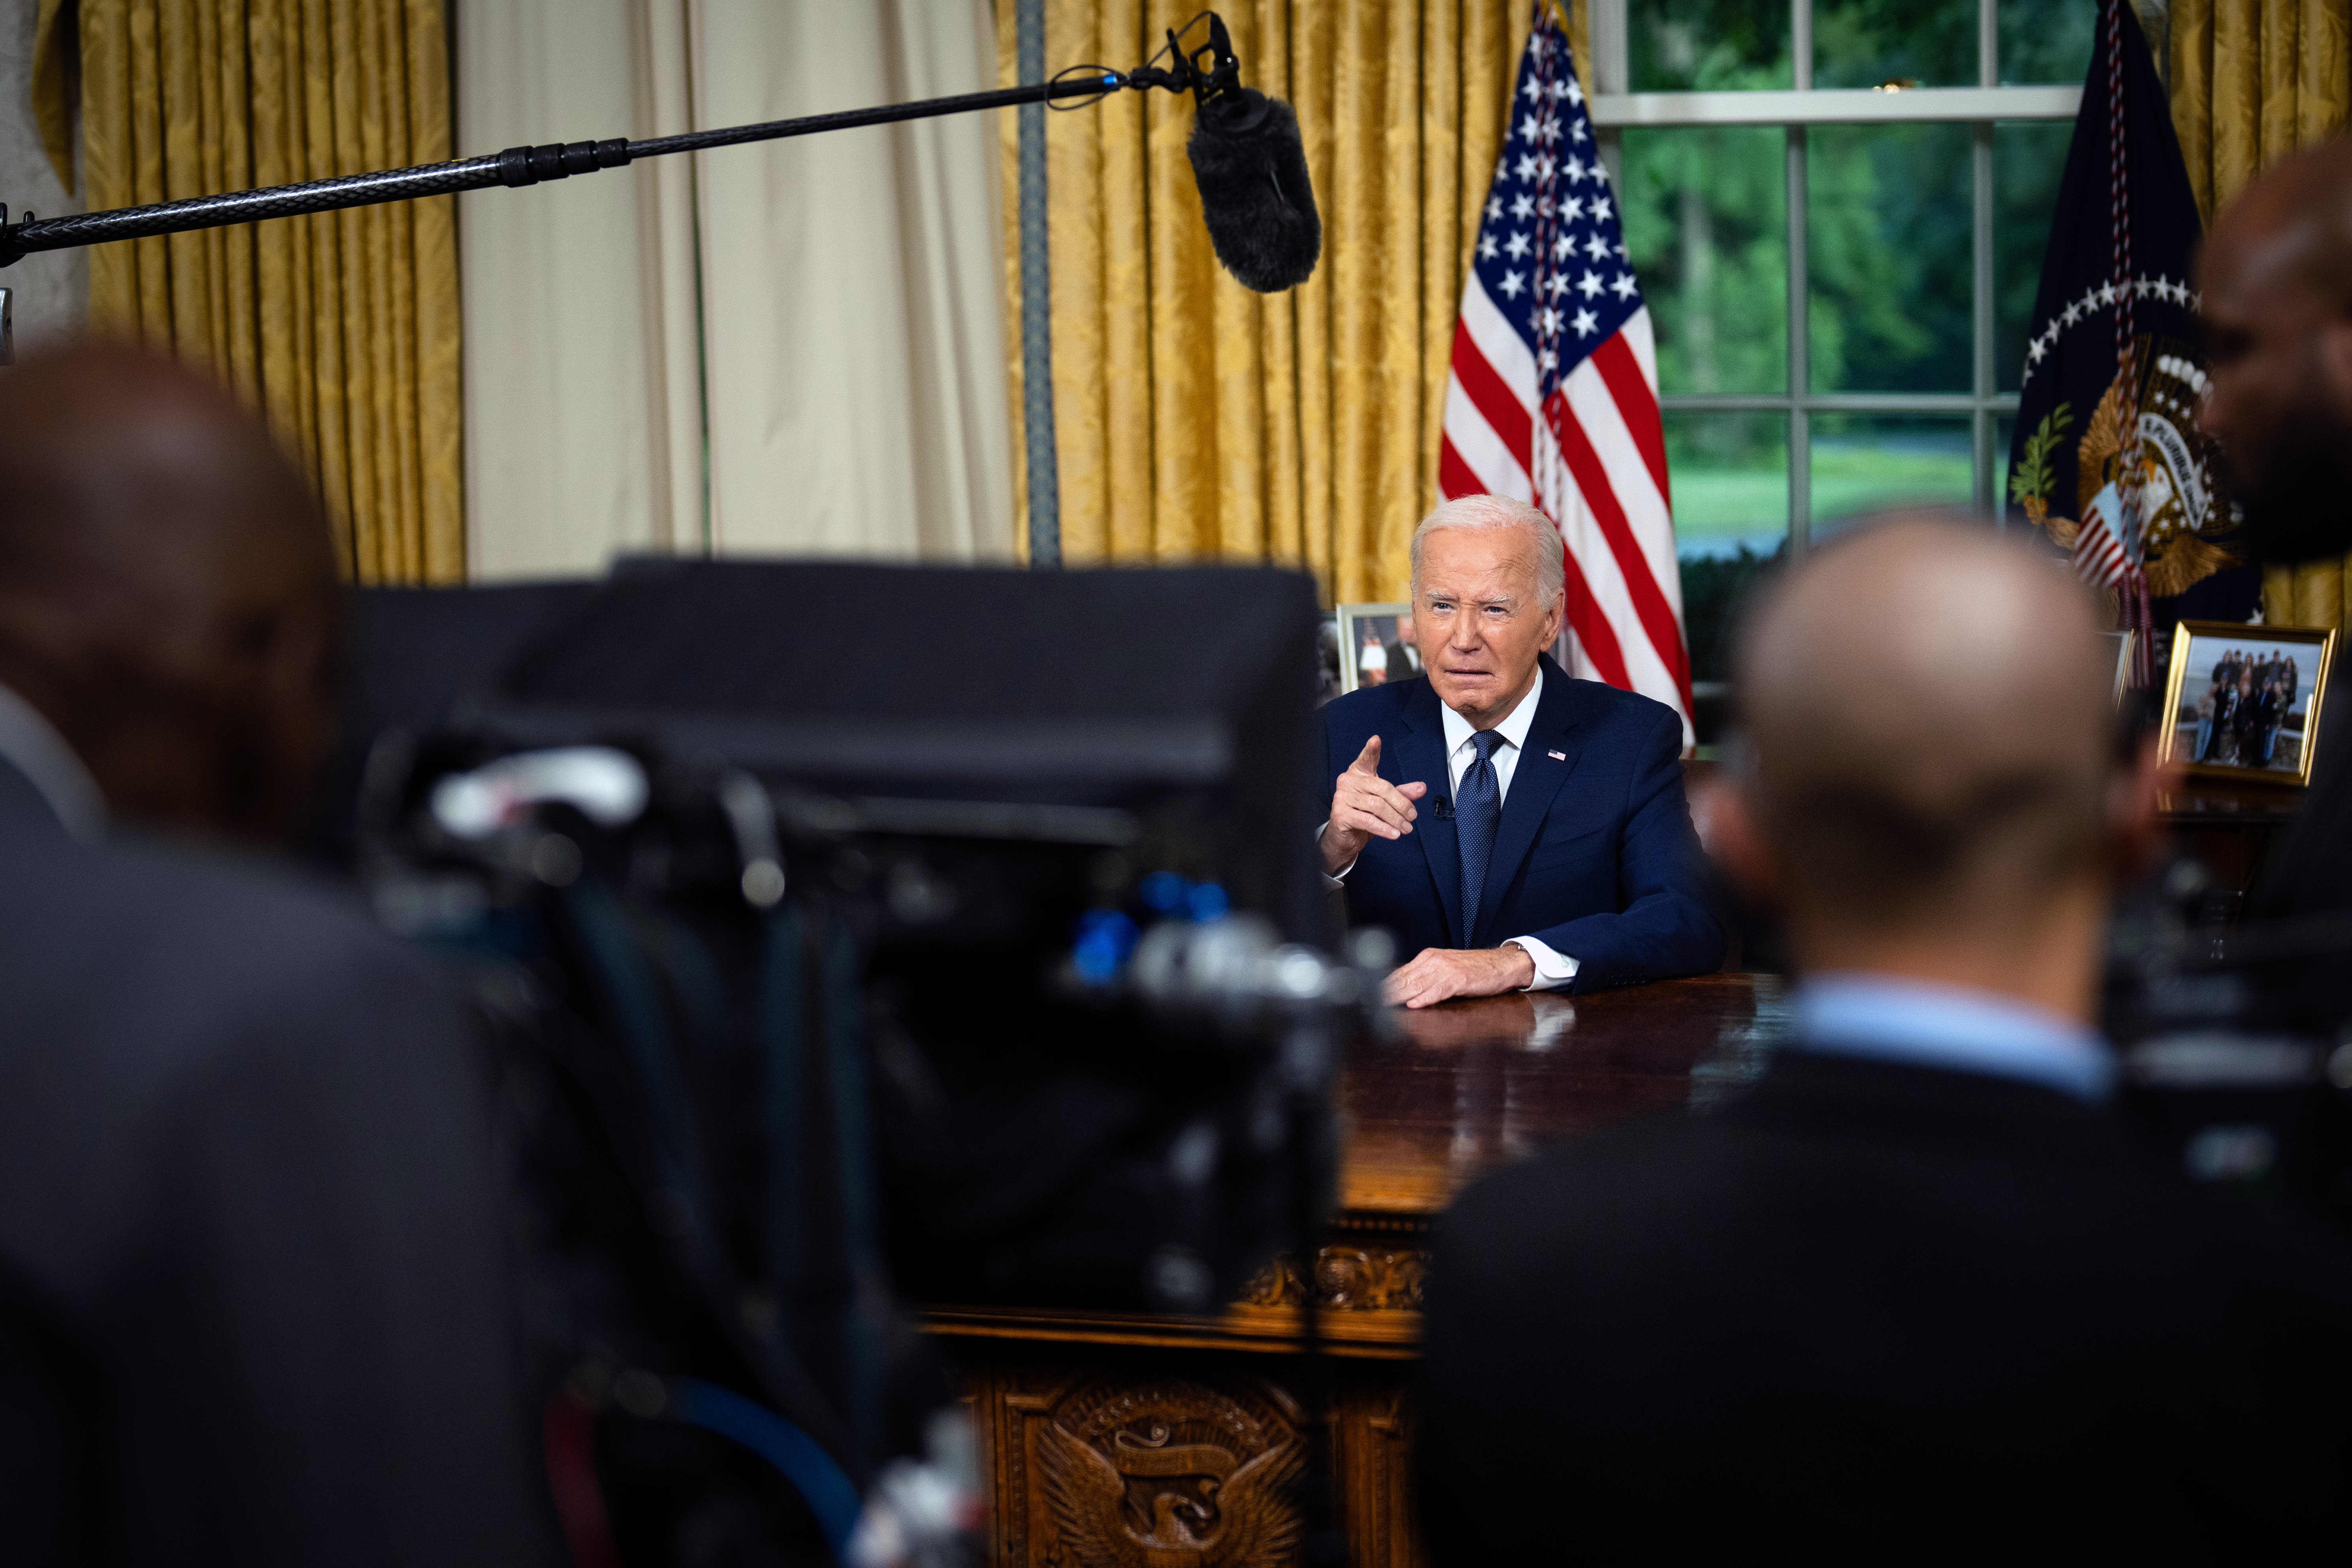 Trump Demands Equal Airtime in Light of Biden’s Planned Address